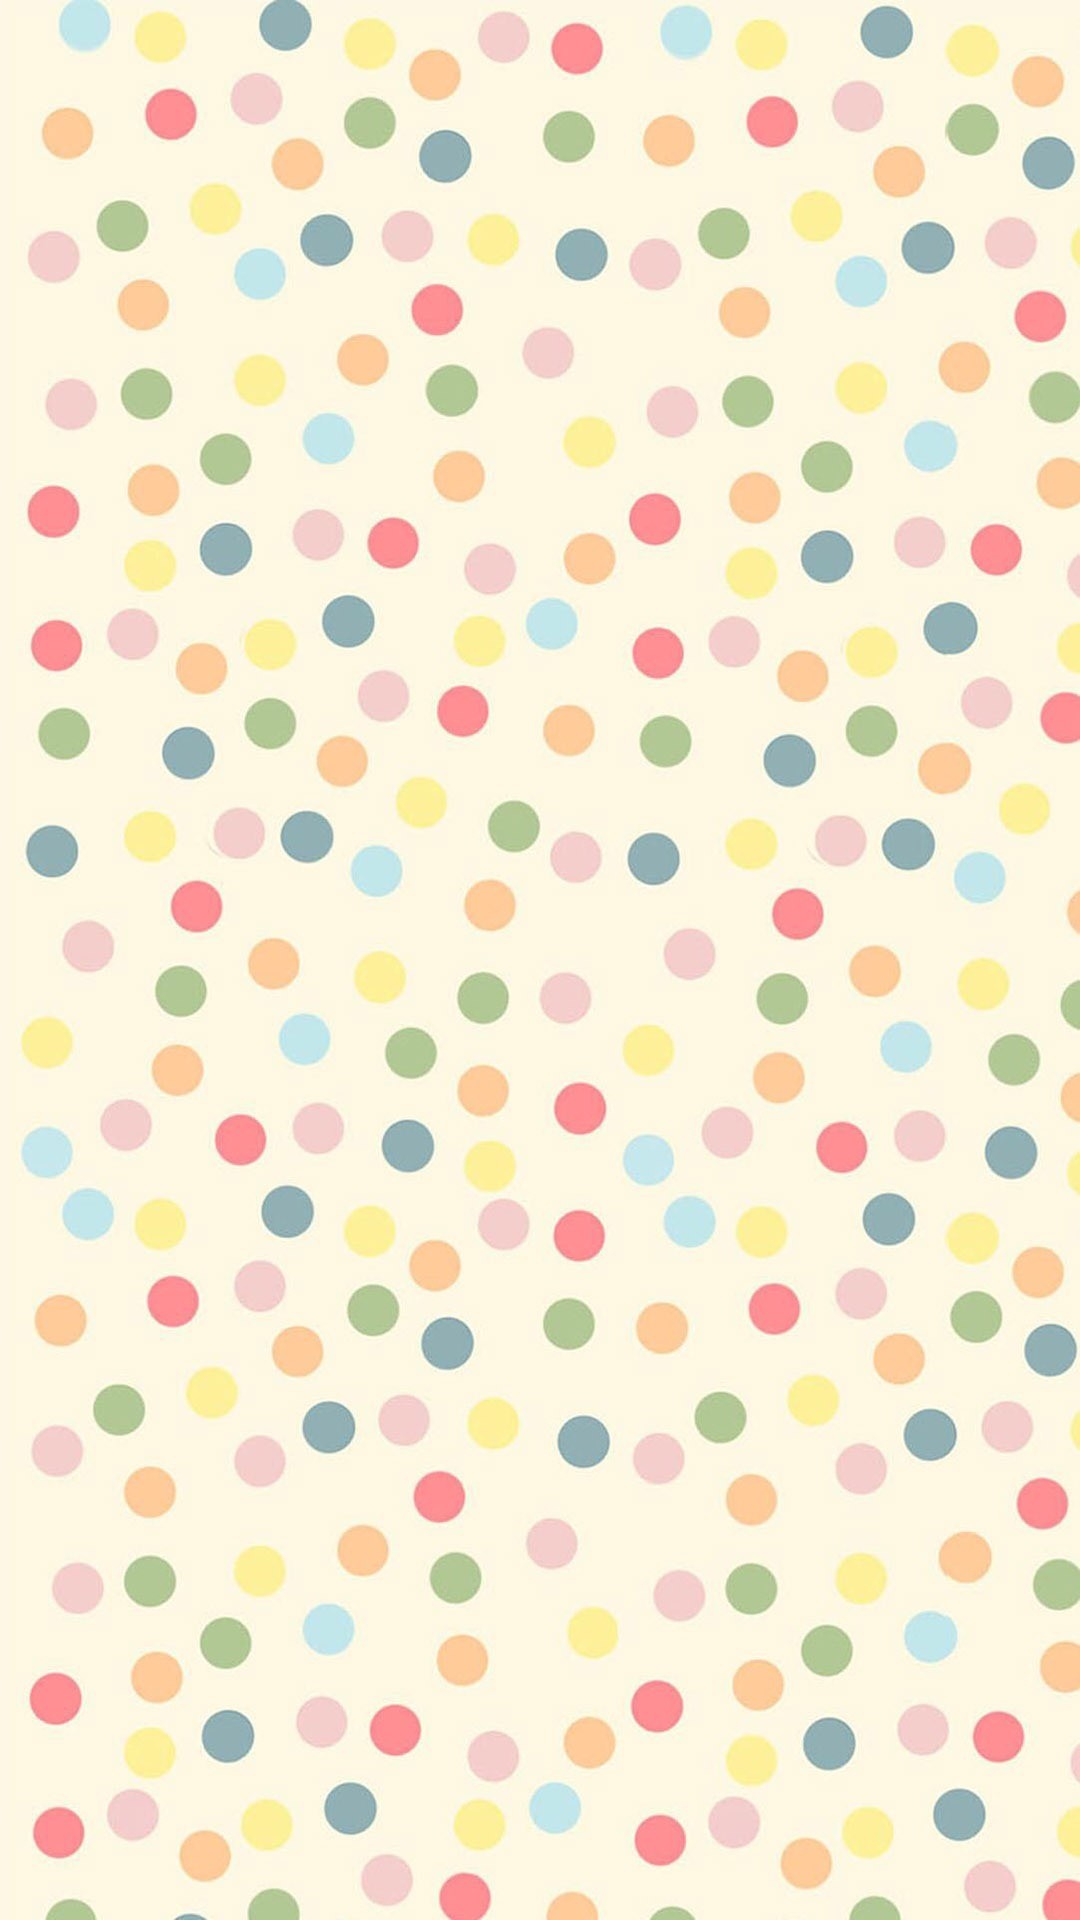 1080x1920 Polka dot wallpaper for iPhone or Android.